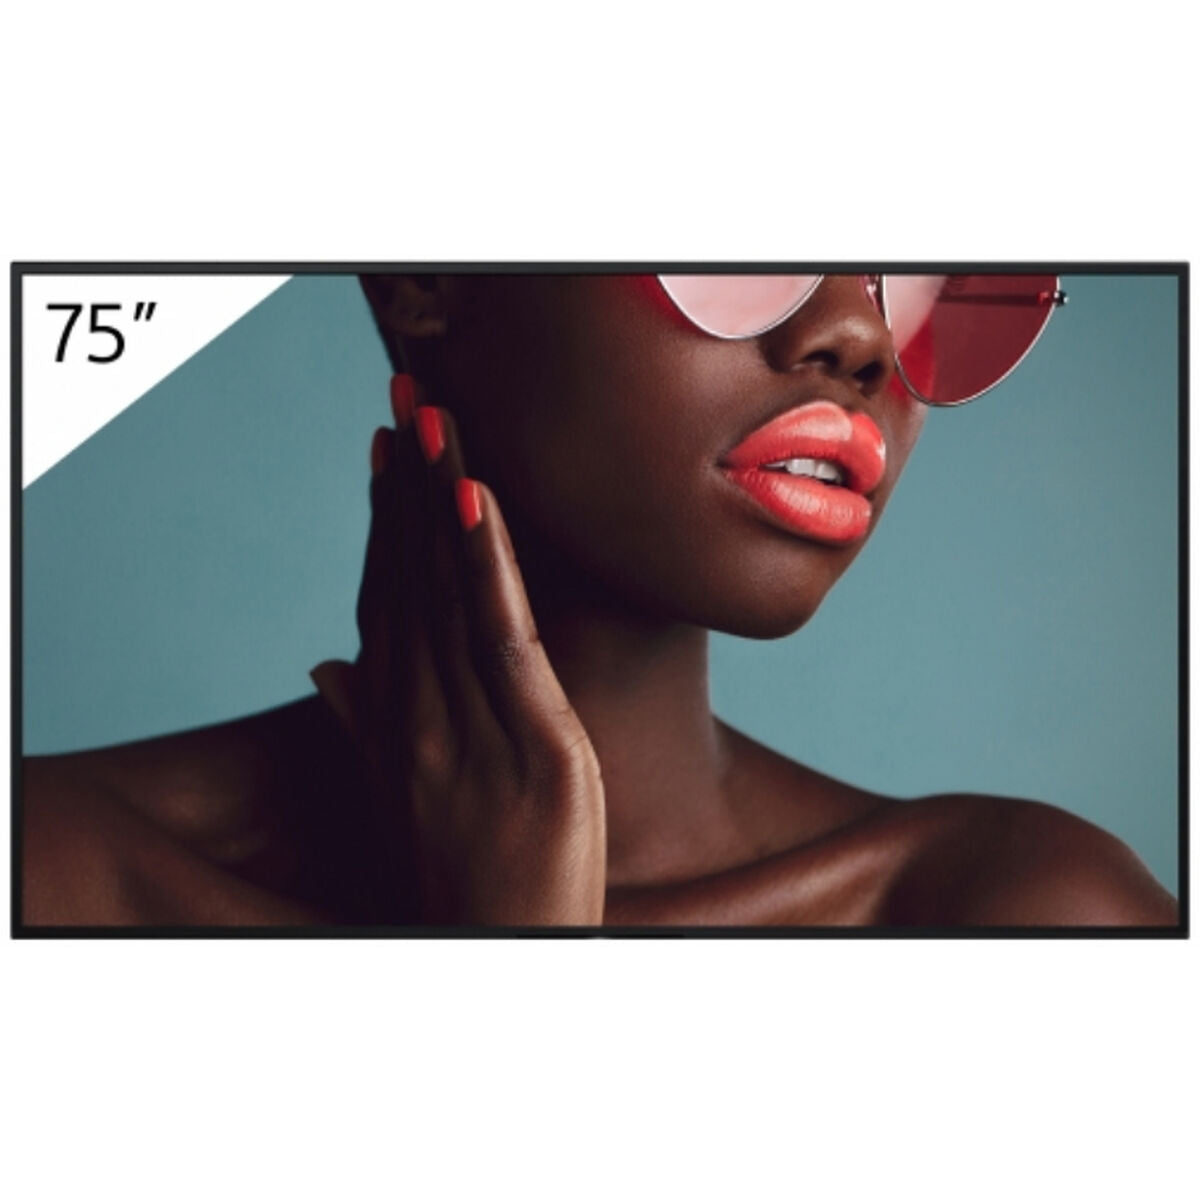 Monitor Videowall Sony Pro BRAVIA FW-75BZ40L 75" IPS D-LED LCD 60 Hz, Sony, Computing, monitor-videowall-sony-pro-bravia-fw-75bz40l-75-ips-d-led-lcd-60-hz, Brand_Sony, category-reference-2609, category-reference-2642, category-reference-2644, category-reference-t-19685, computers / peripherals, Condition_NEW, office, Price_+ 1000, Teleworking, RiotNook